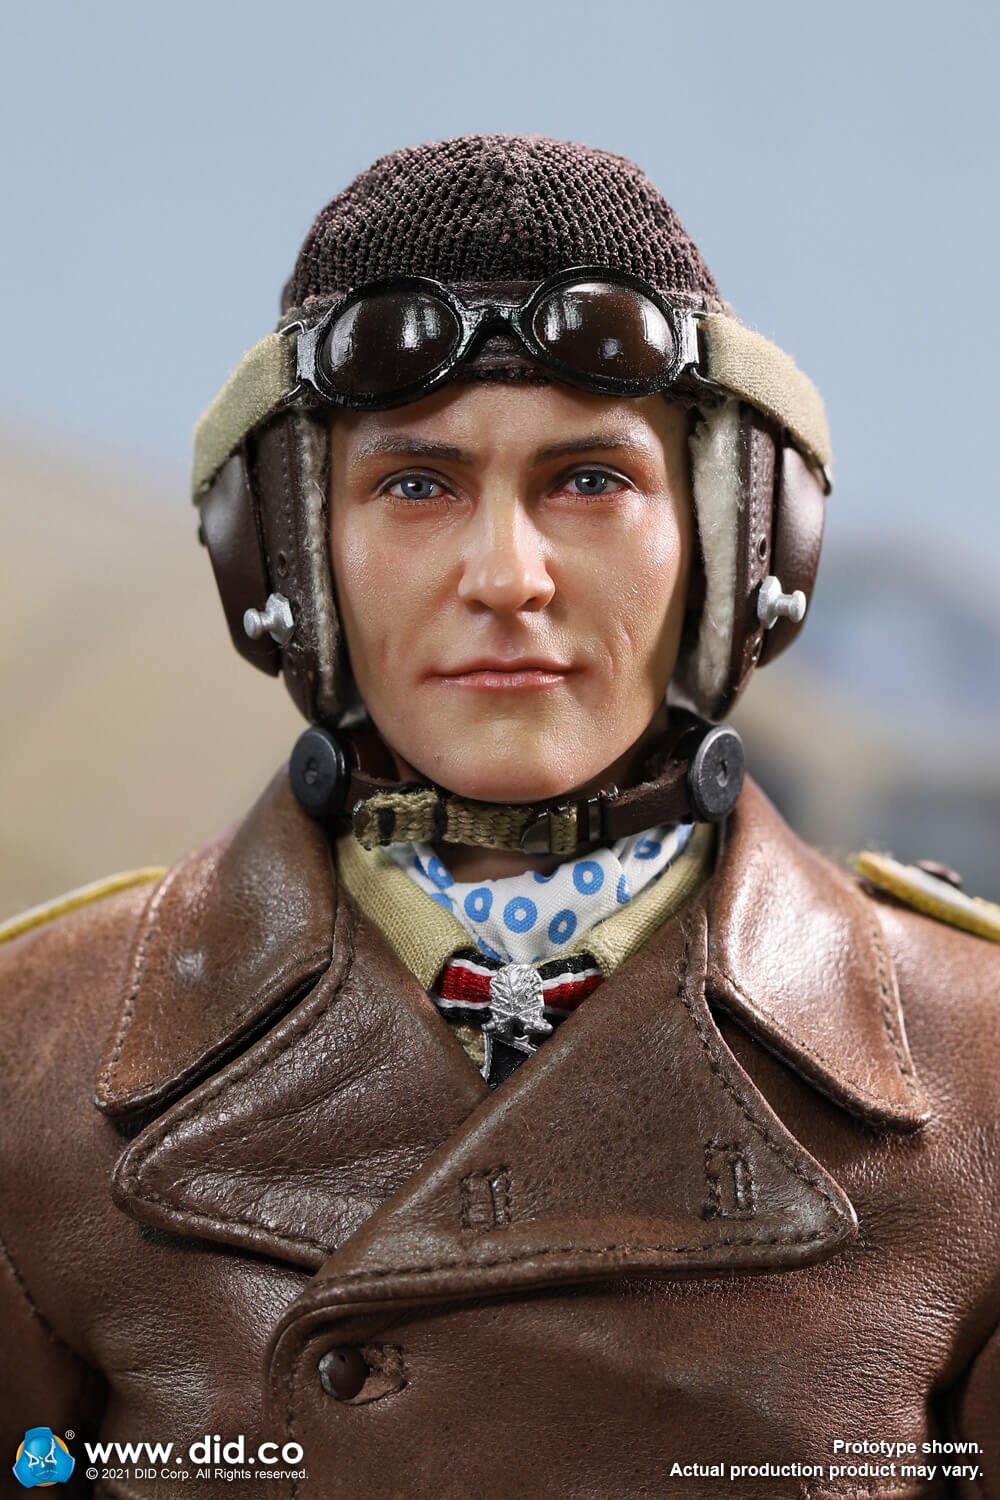 Diorama - NEW PRODUCT: D80154 WWII German Luftwaffe Flying Ace “Star Of Africa” – Hans-Joachim Marseille & E60060  Diorama Of “Star Of Africa” 5516